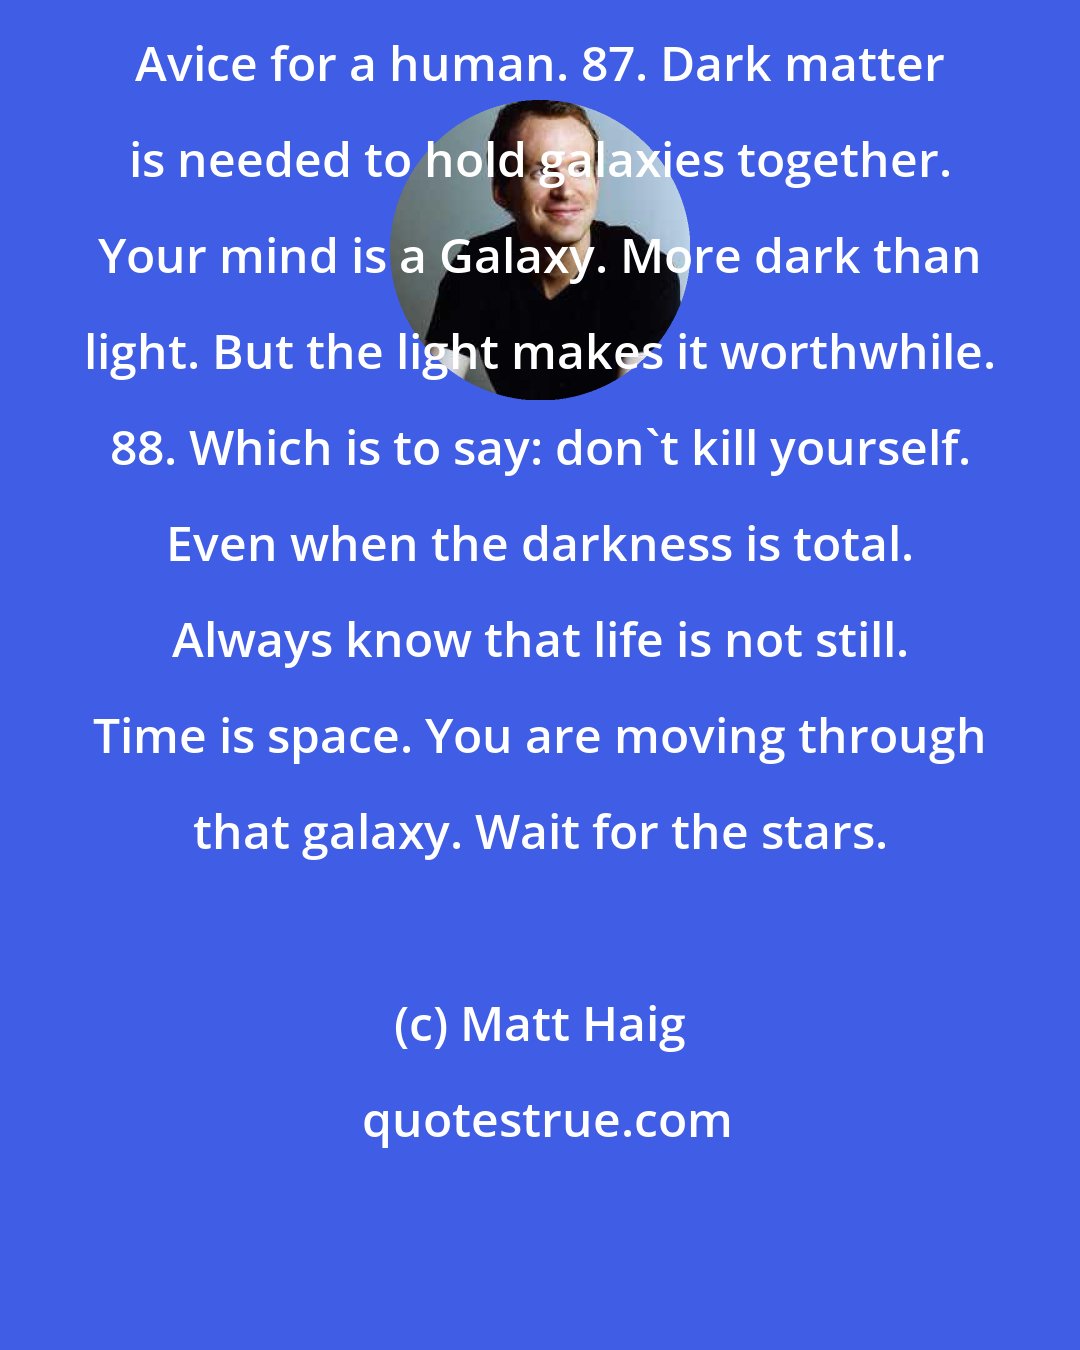 Matt Haig: Avice for a human. 87. Dark matter is needed to hold galaxies together. Your mind is a Galaxy. More dark than light. But the light makes it worthwhile. 88. Which is to say: don't kill yourself. Even when the darkness is total. Always know that life is not still. Time is space. You are moving through that galaxy. Wait for the stars.